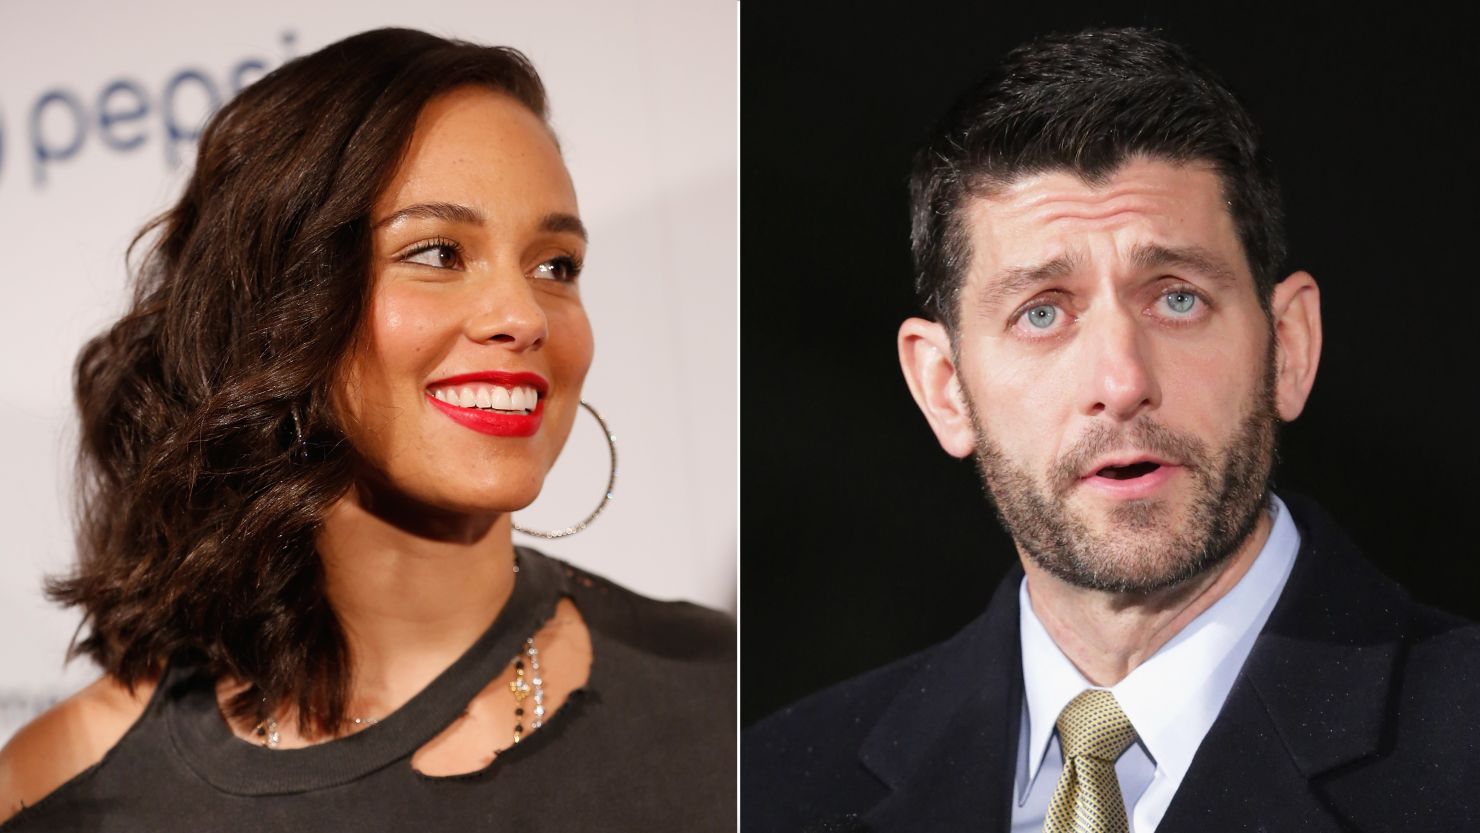 Alicia Keys has worked to get House Speaker Paul Ryan to call a vote on criminal justice reform.